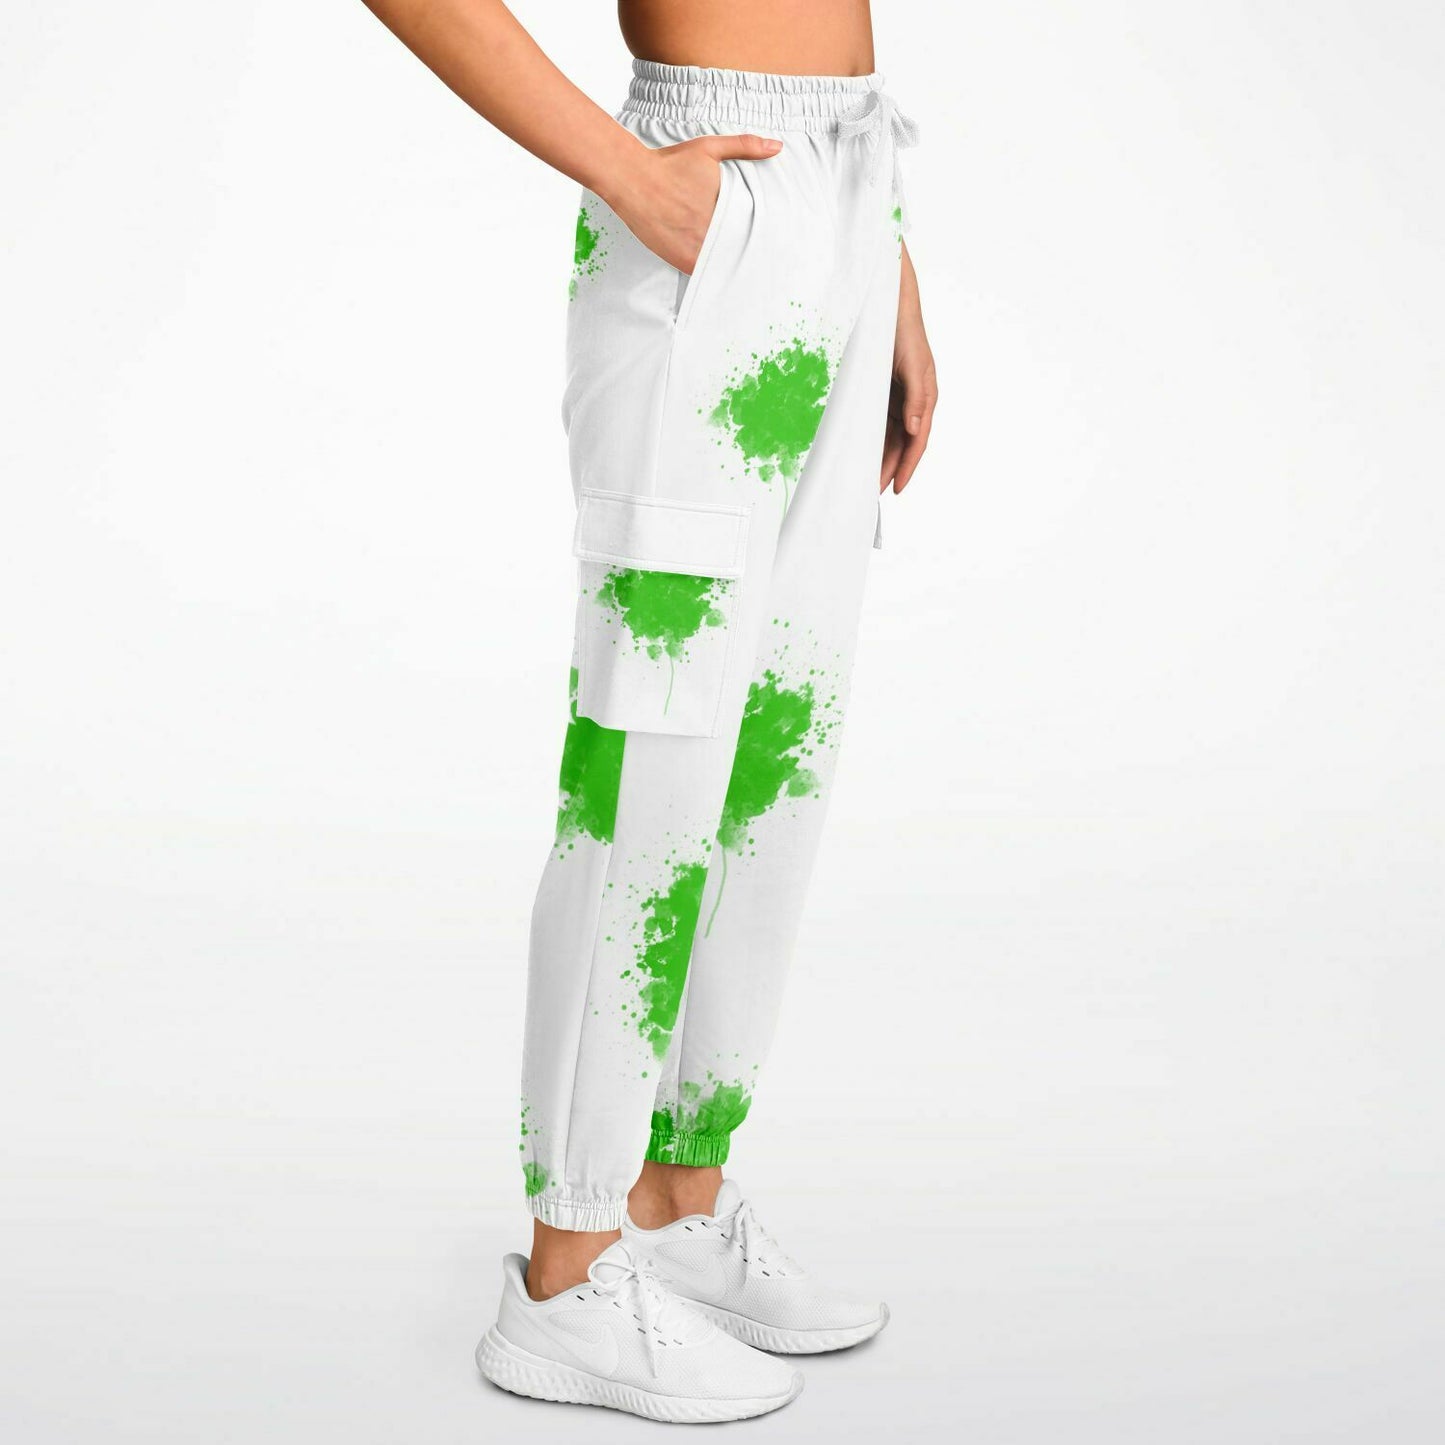 It's Personal White Sweat Pants with Greem Paint Splash- Green and Yellow Text